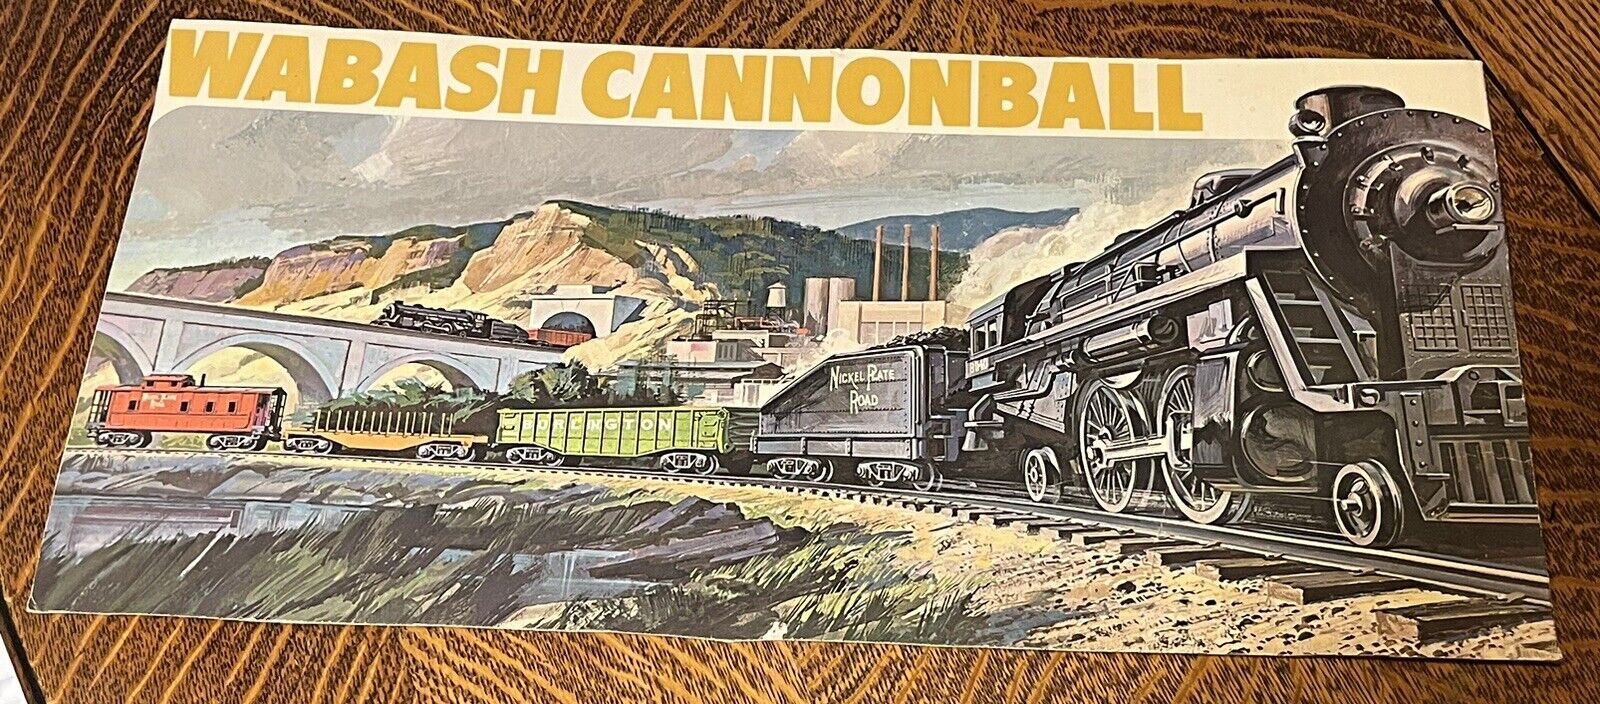 Vintage WABASH CANNONBALL TRAIN Cardboard Poster Sign 9.5”x 19”